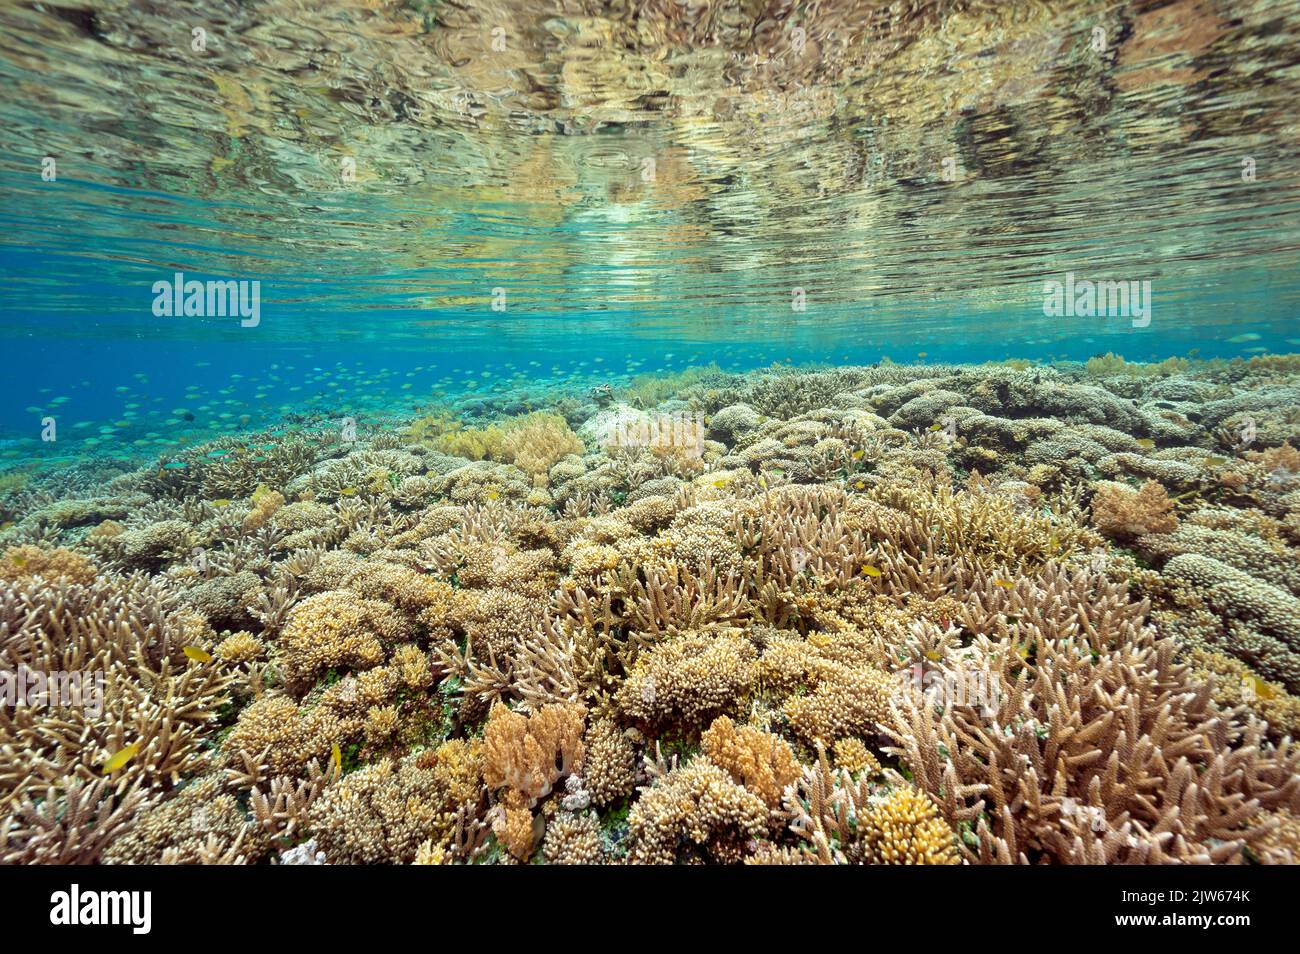 Reef scenic with pristine staghorn corals Raja Ampat Indonesia. Stock Photo